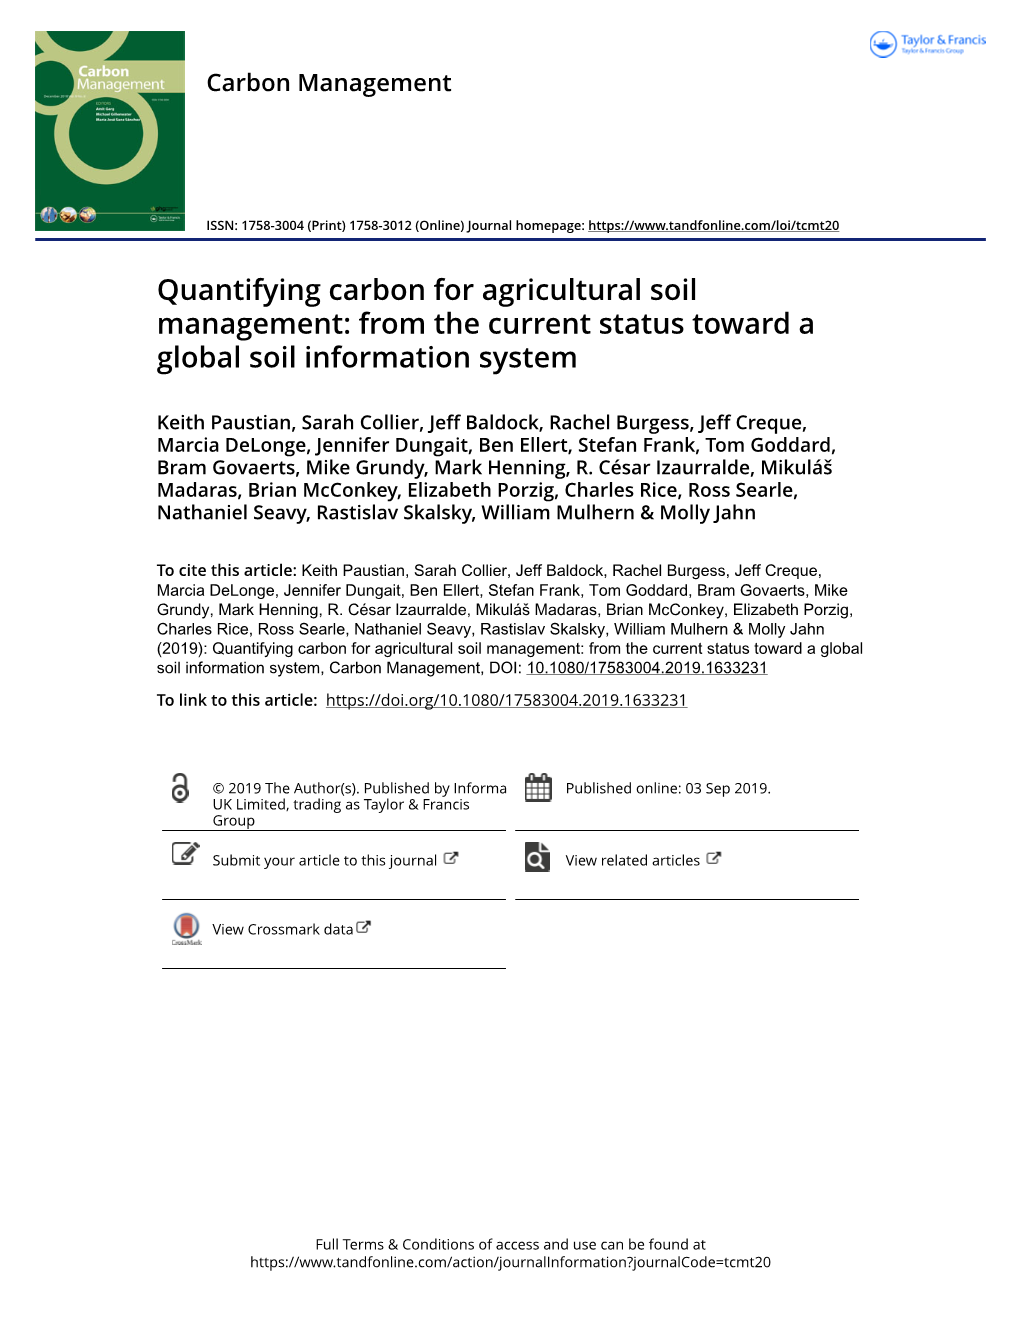 Quantifying Carbon for Agricultural Soil Management: from the Current Status Toward a Global Soil Information System